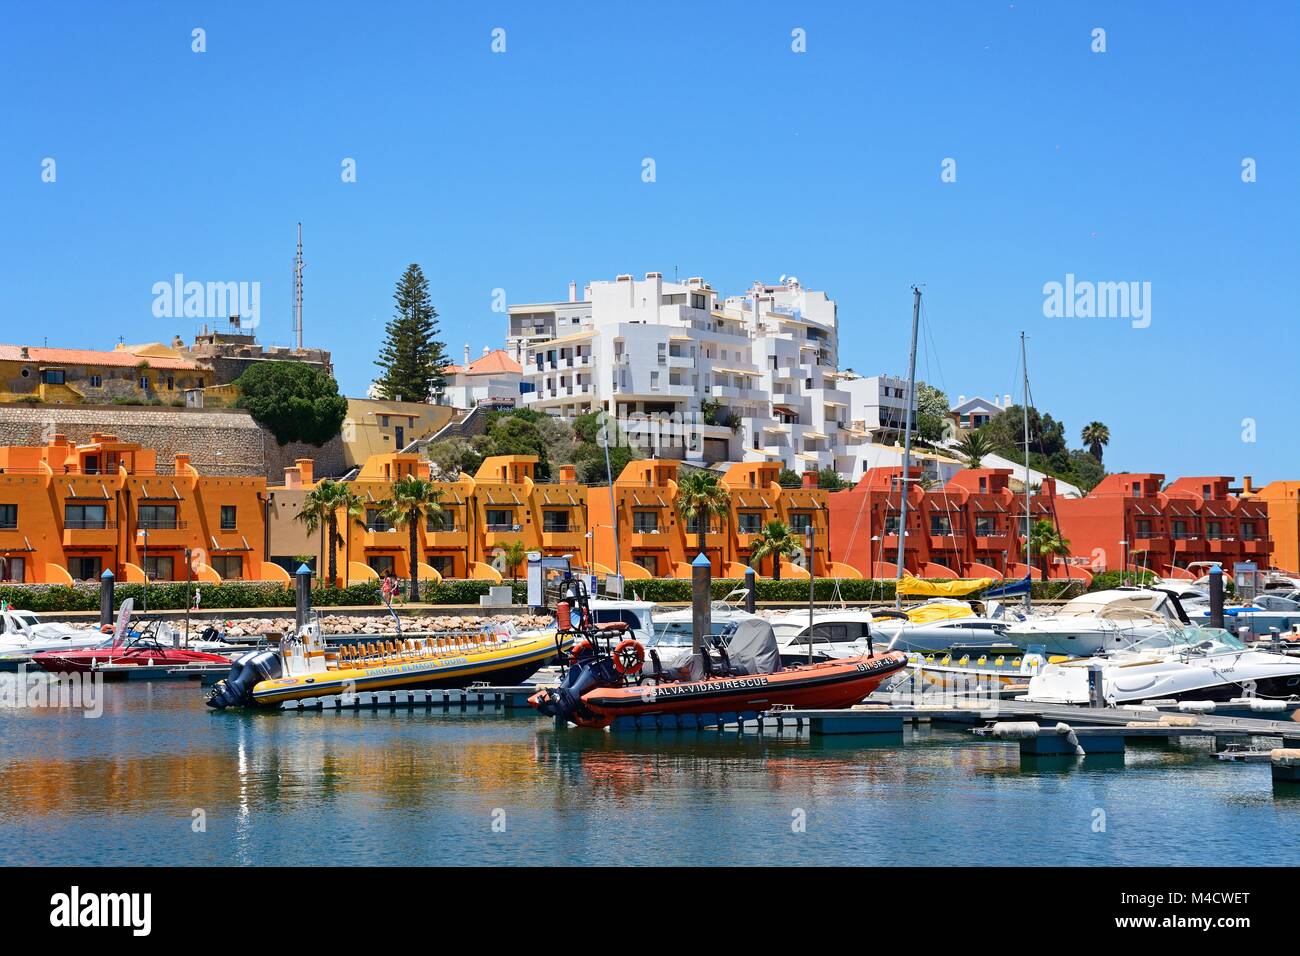 Yachts and motorboats moored in the marina with apartments to the rear, Portimao, Algarve, Portugal, Europe. Stock Photo